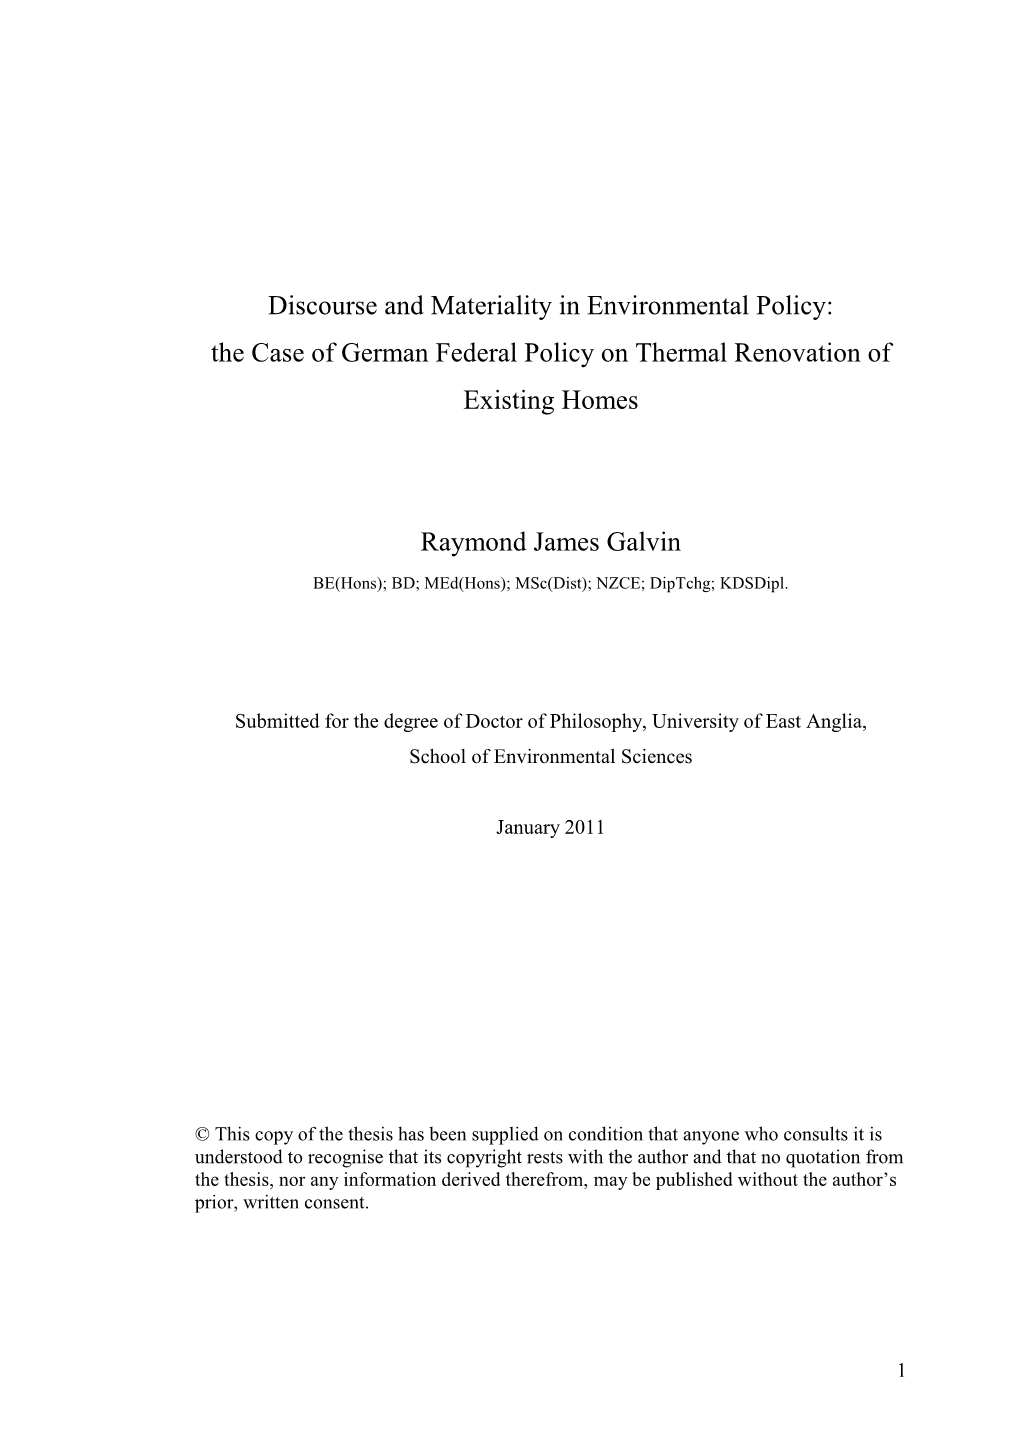 Discourse and Materiality in Environmental Policy: the Case of German Federal Policy on Thermal Renovation of Existing Homes